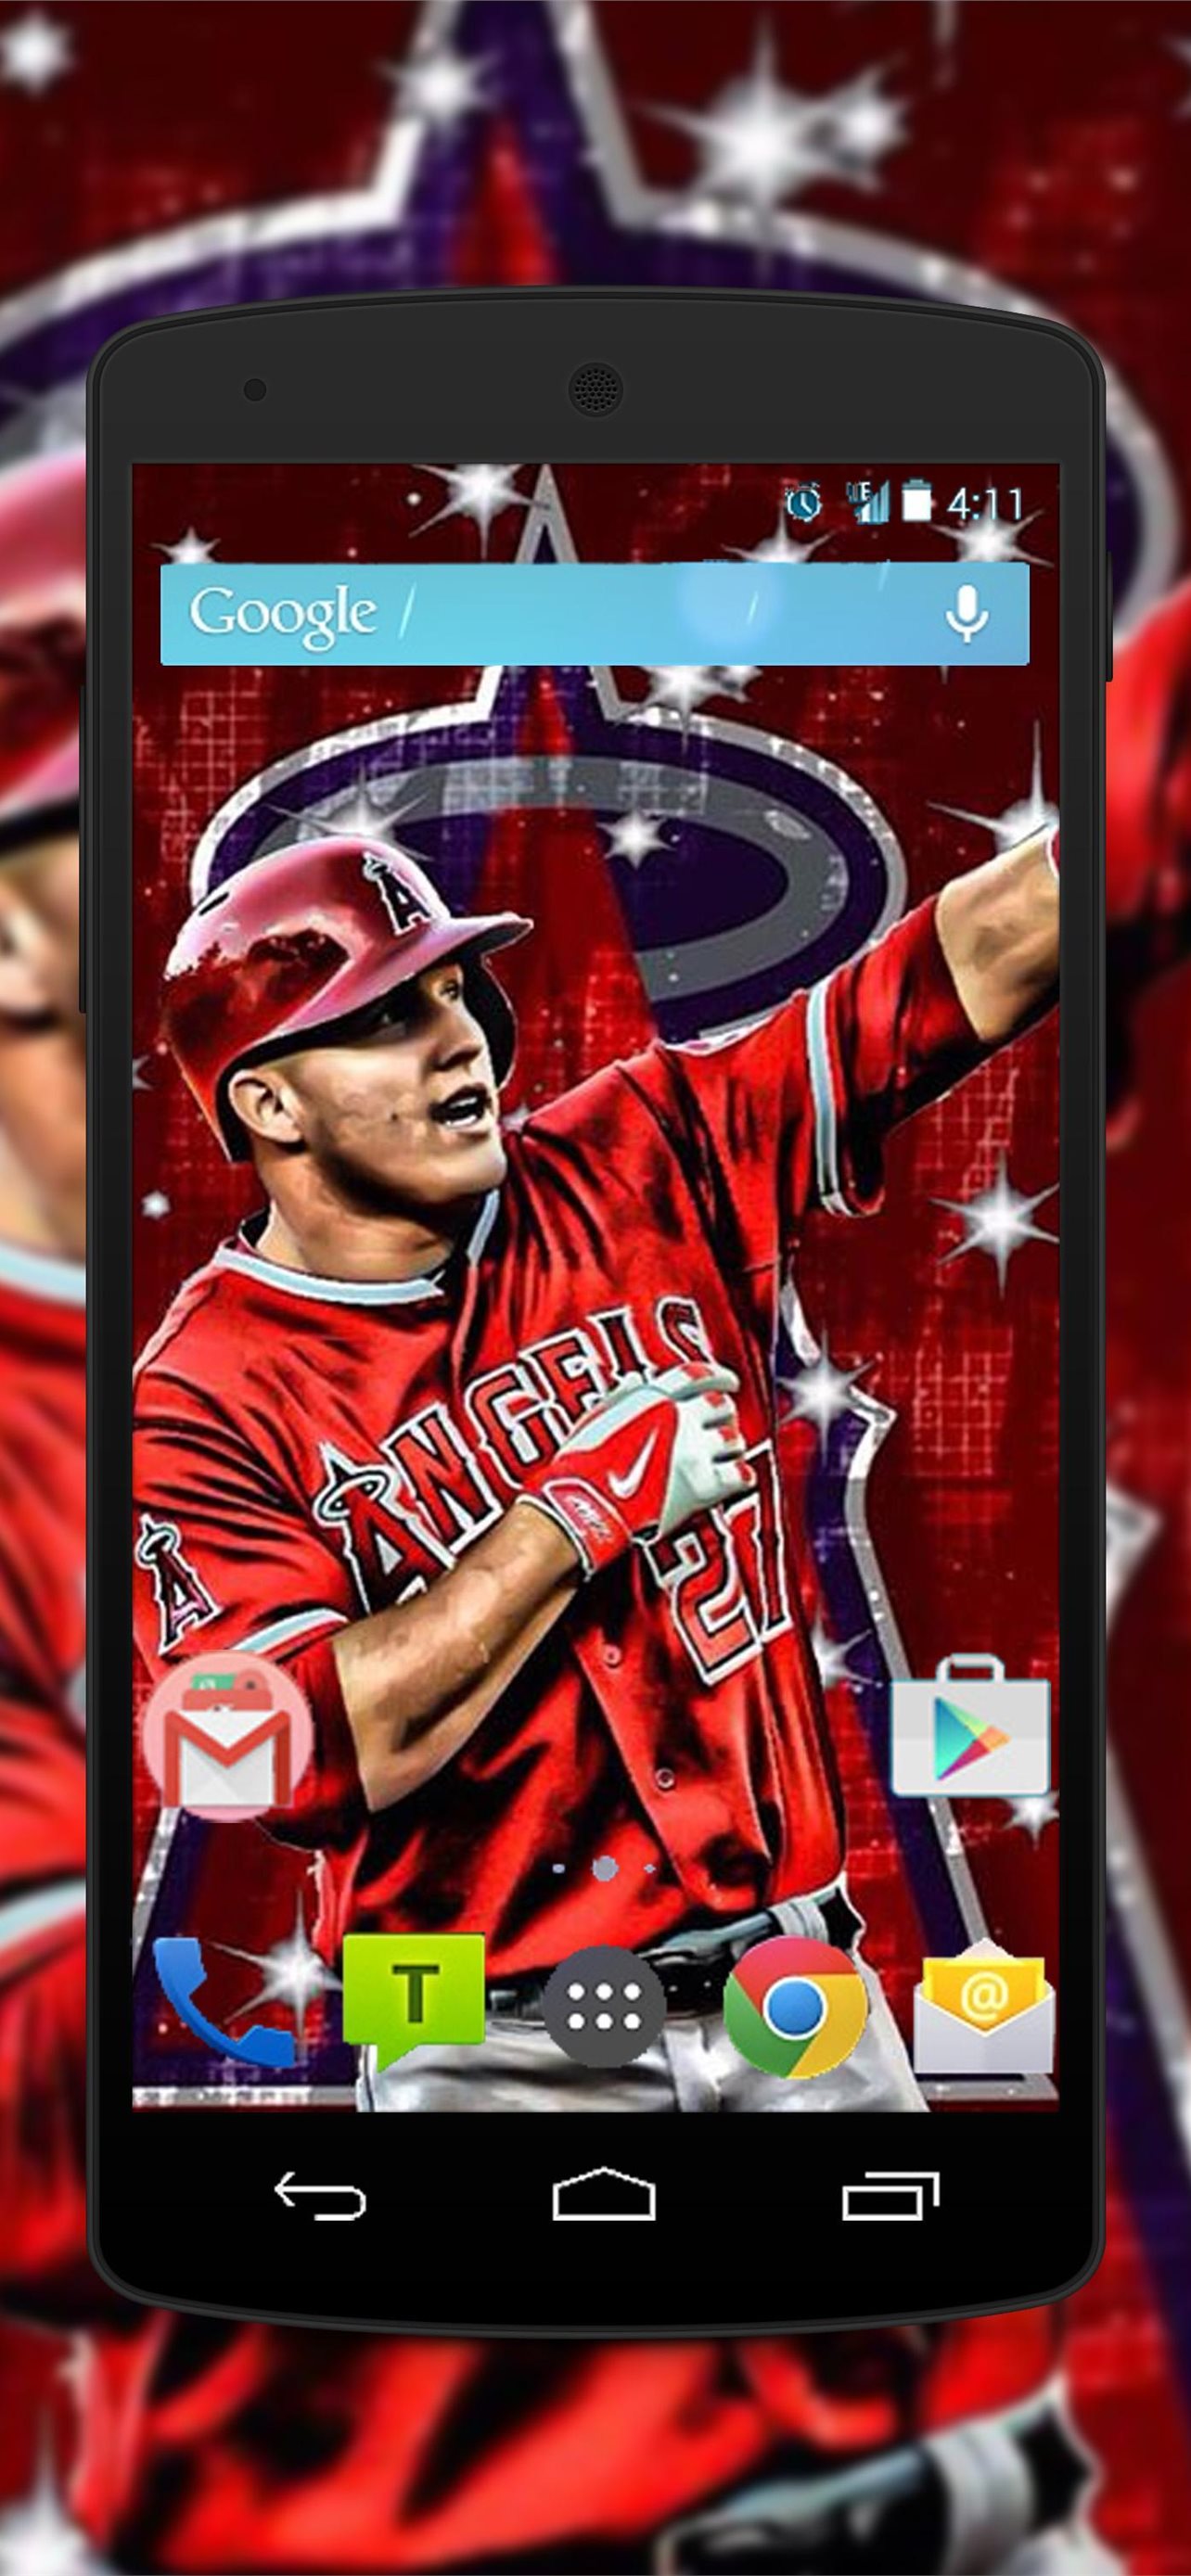 Mike Trout iPhone Wallpaper Made by me feel free to use and let me know  what you think GoHalos  rangelsbaseball